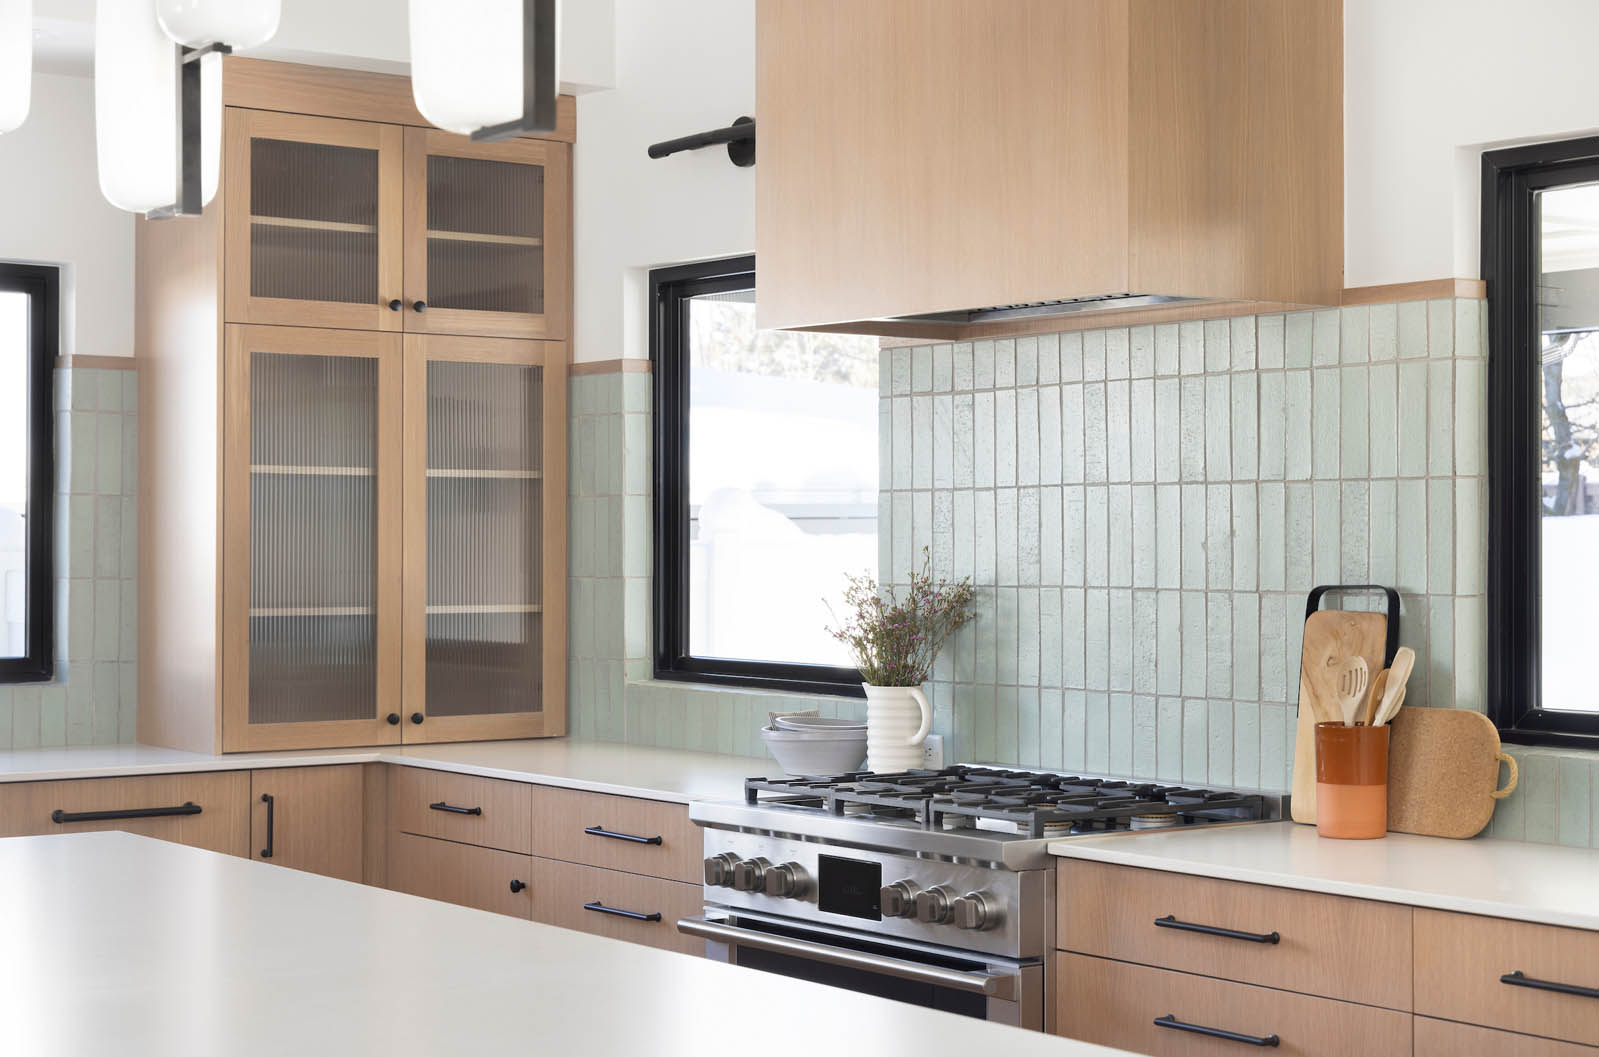 Midcentury kitchen remodel range and cabinets